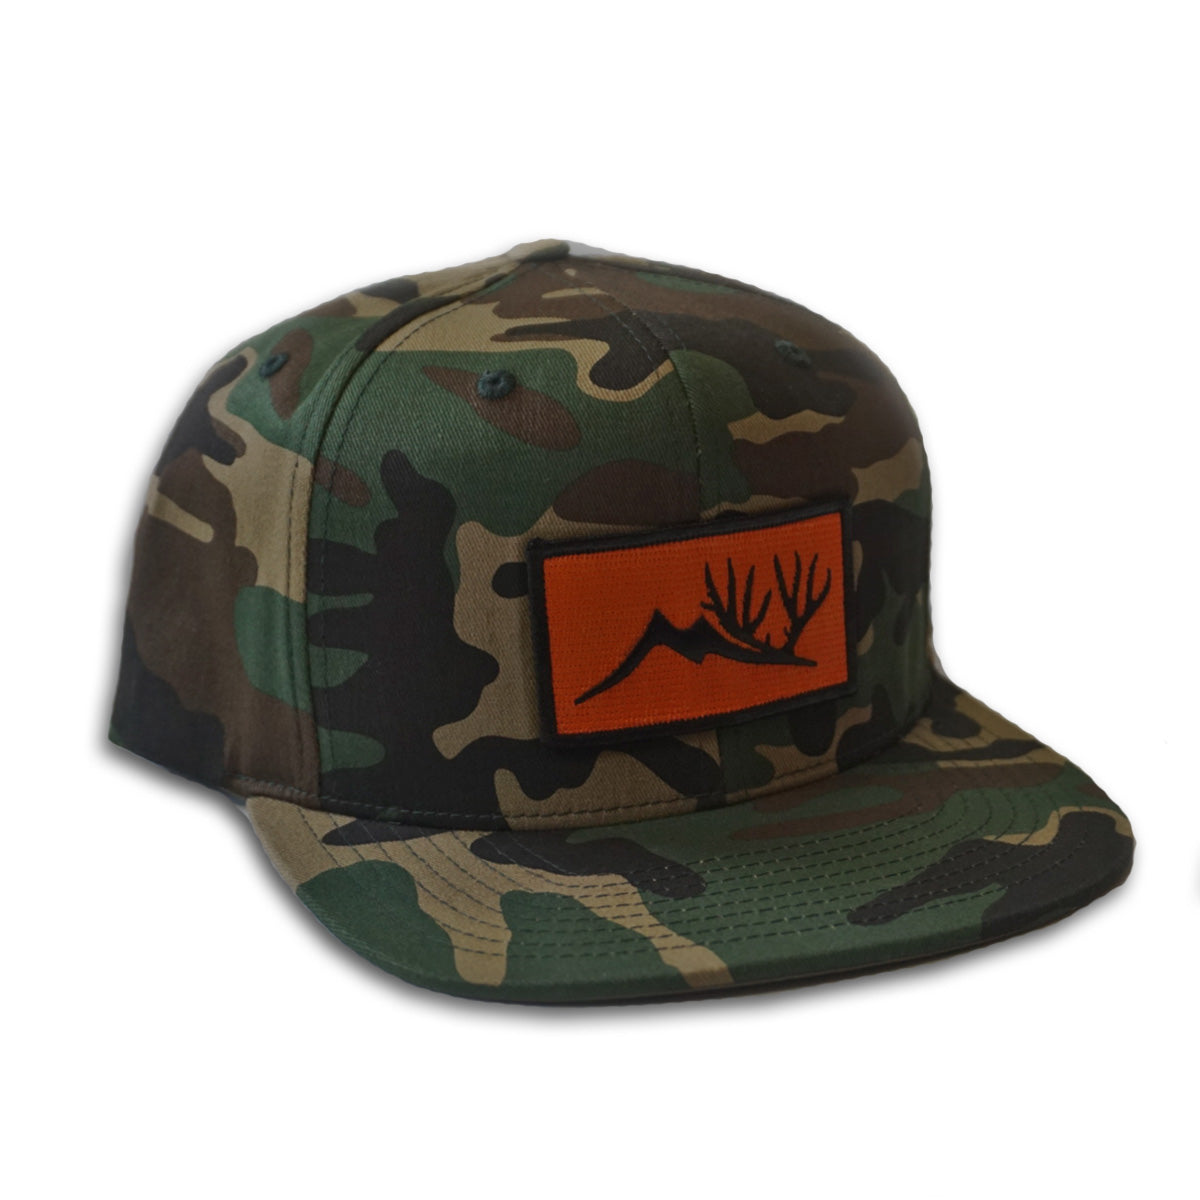 Camouflage trucker hat that has an altitude logo patch emblazed on the forehead